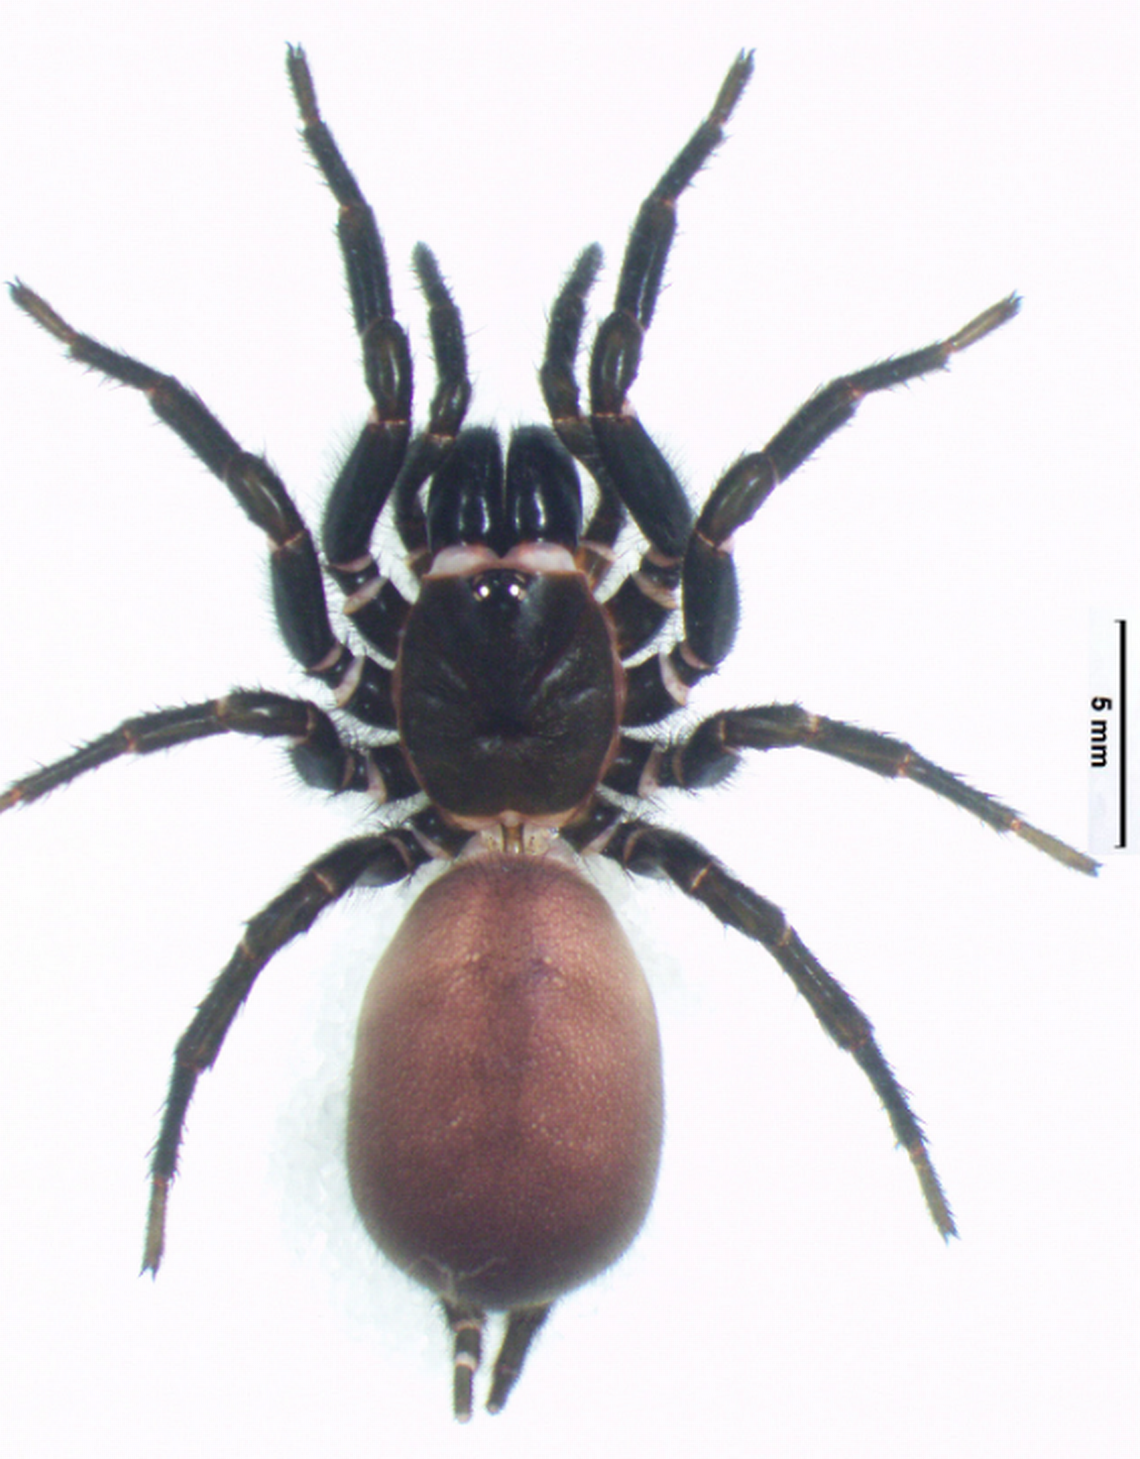 Macrothele auriculata Photo from the European Journal of Taxonomy